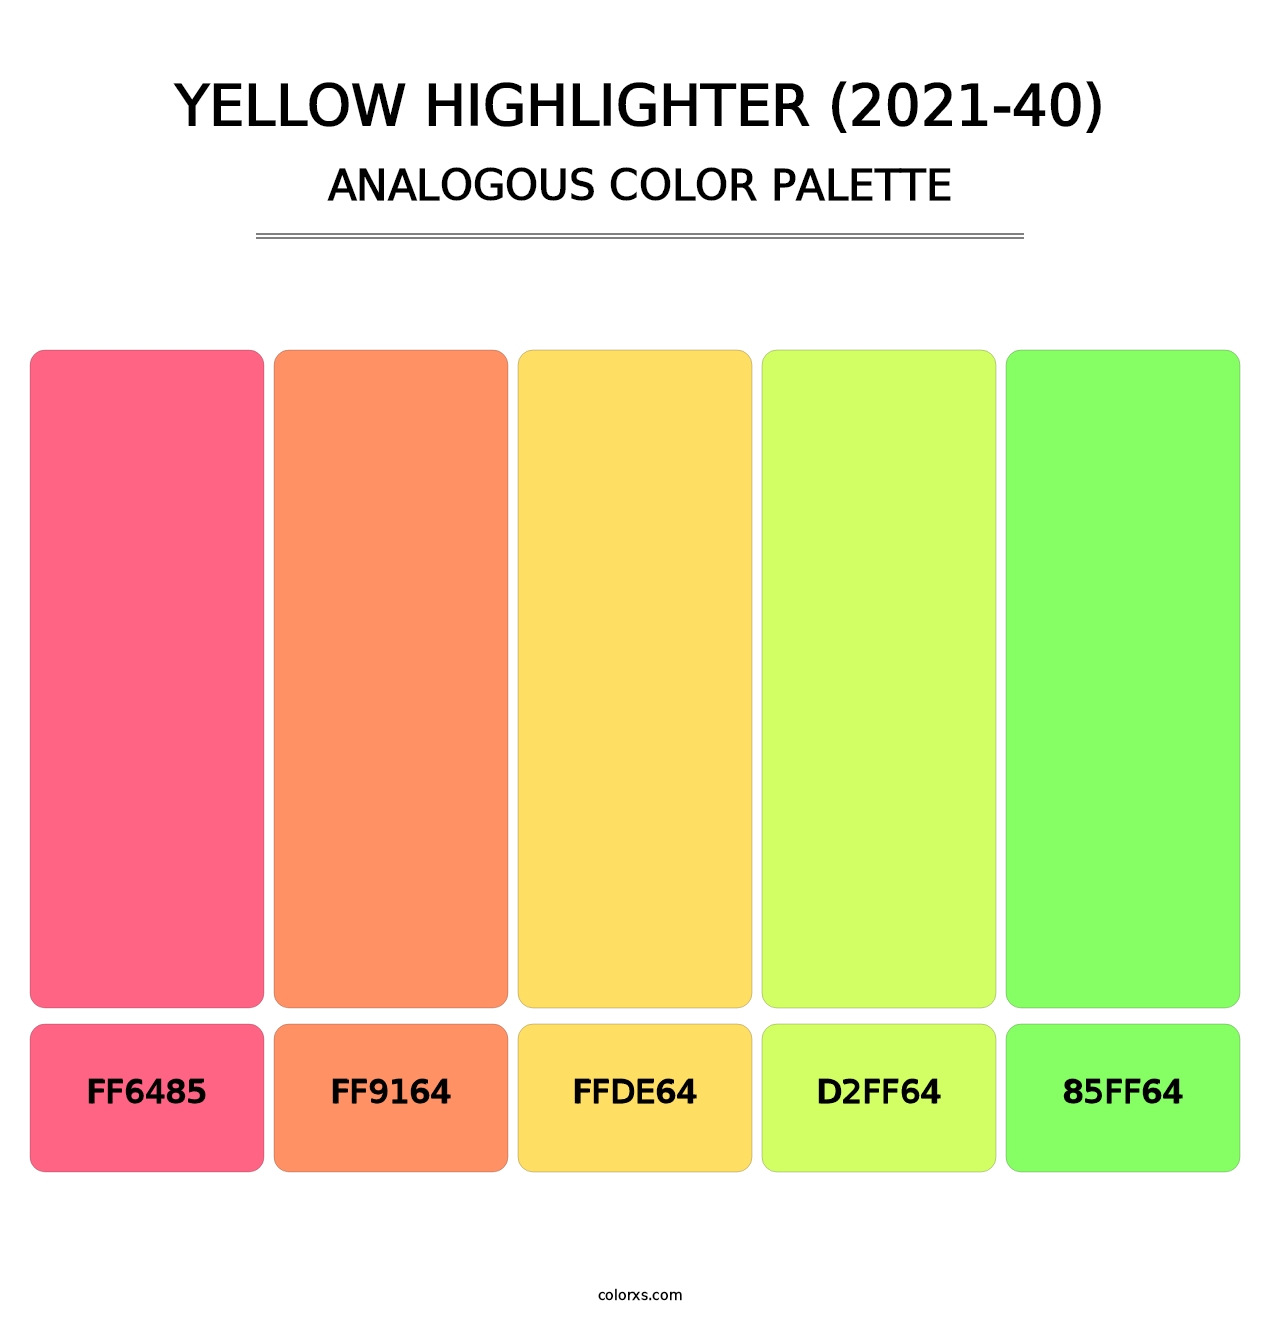 Yellow Highlighter (2021-40) - Analogous Color Palette